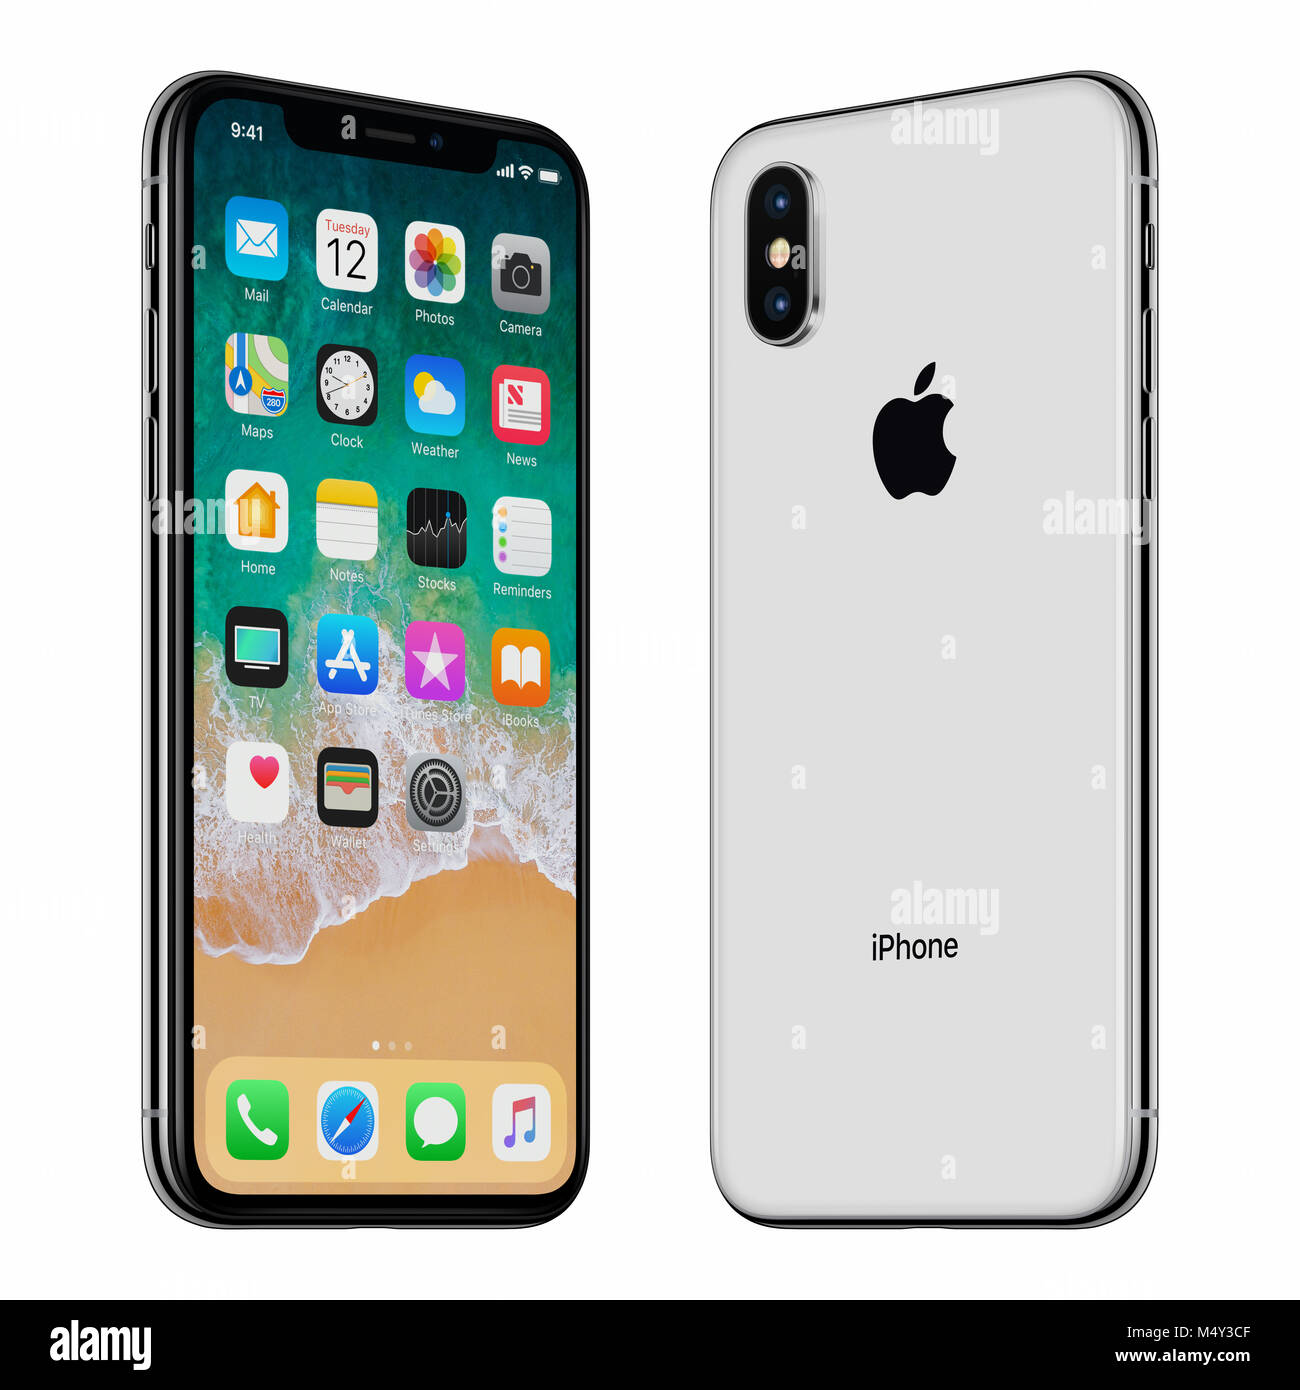 Black Apple iPhone X front side and back side turned towards each other. Stock Photo